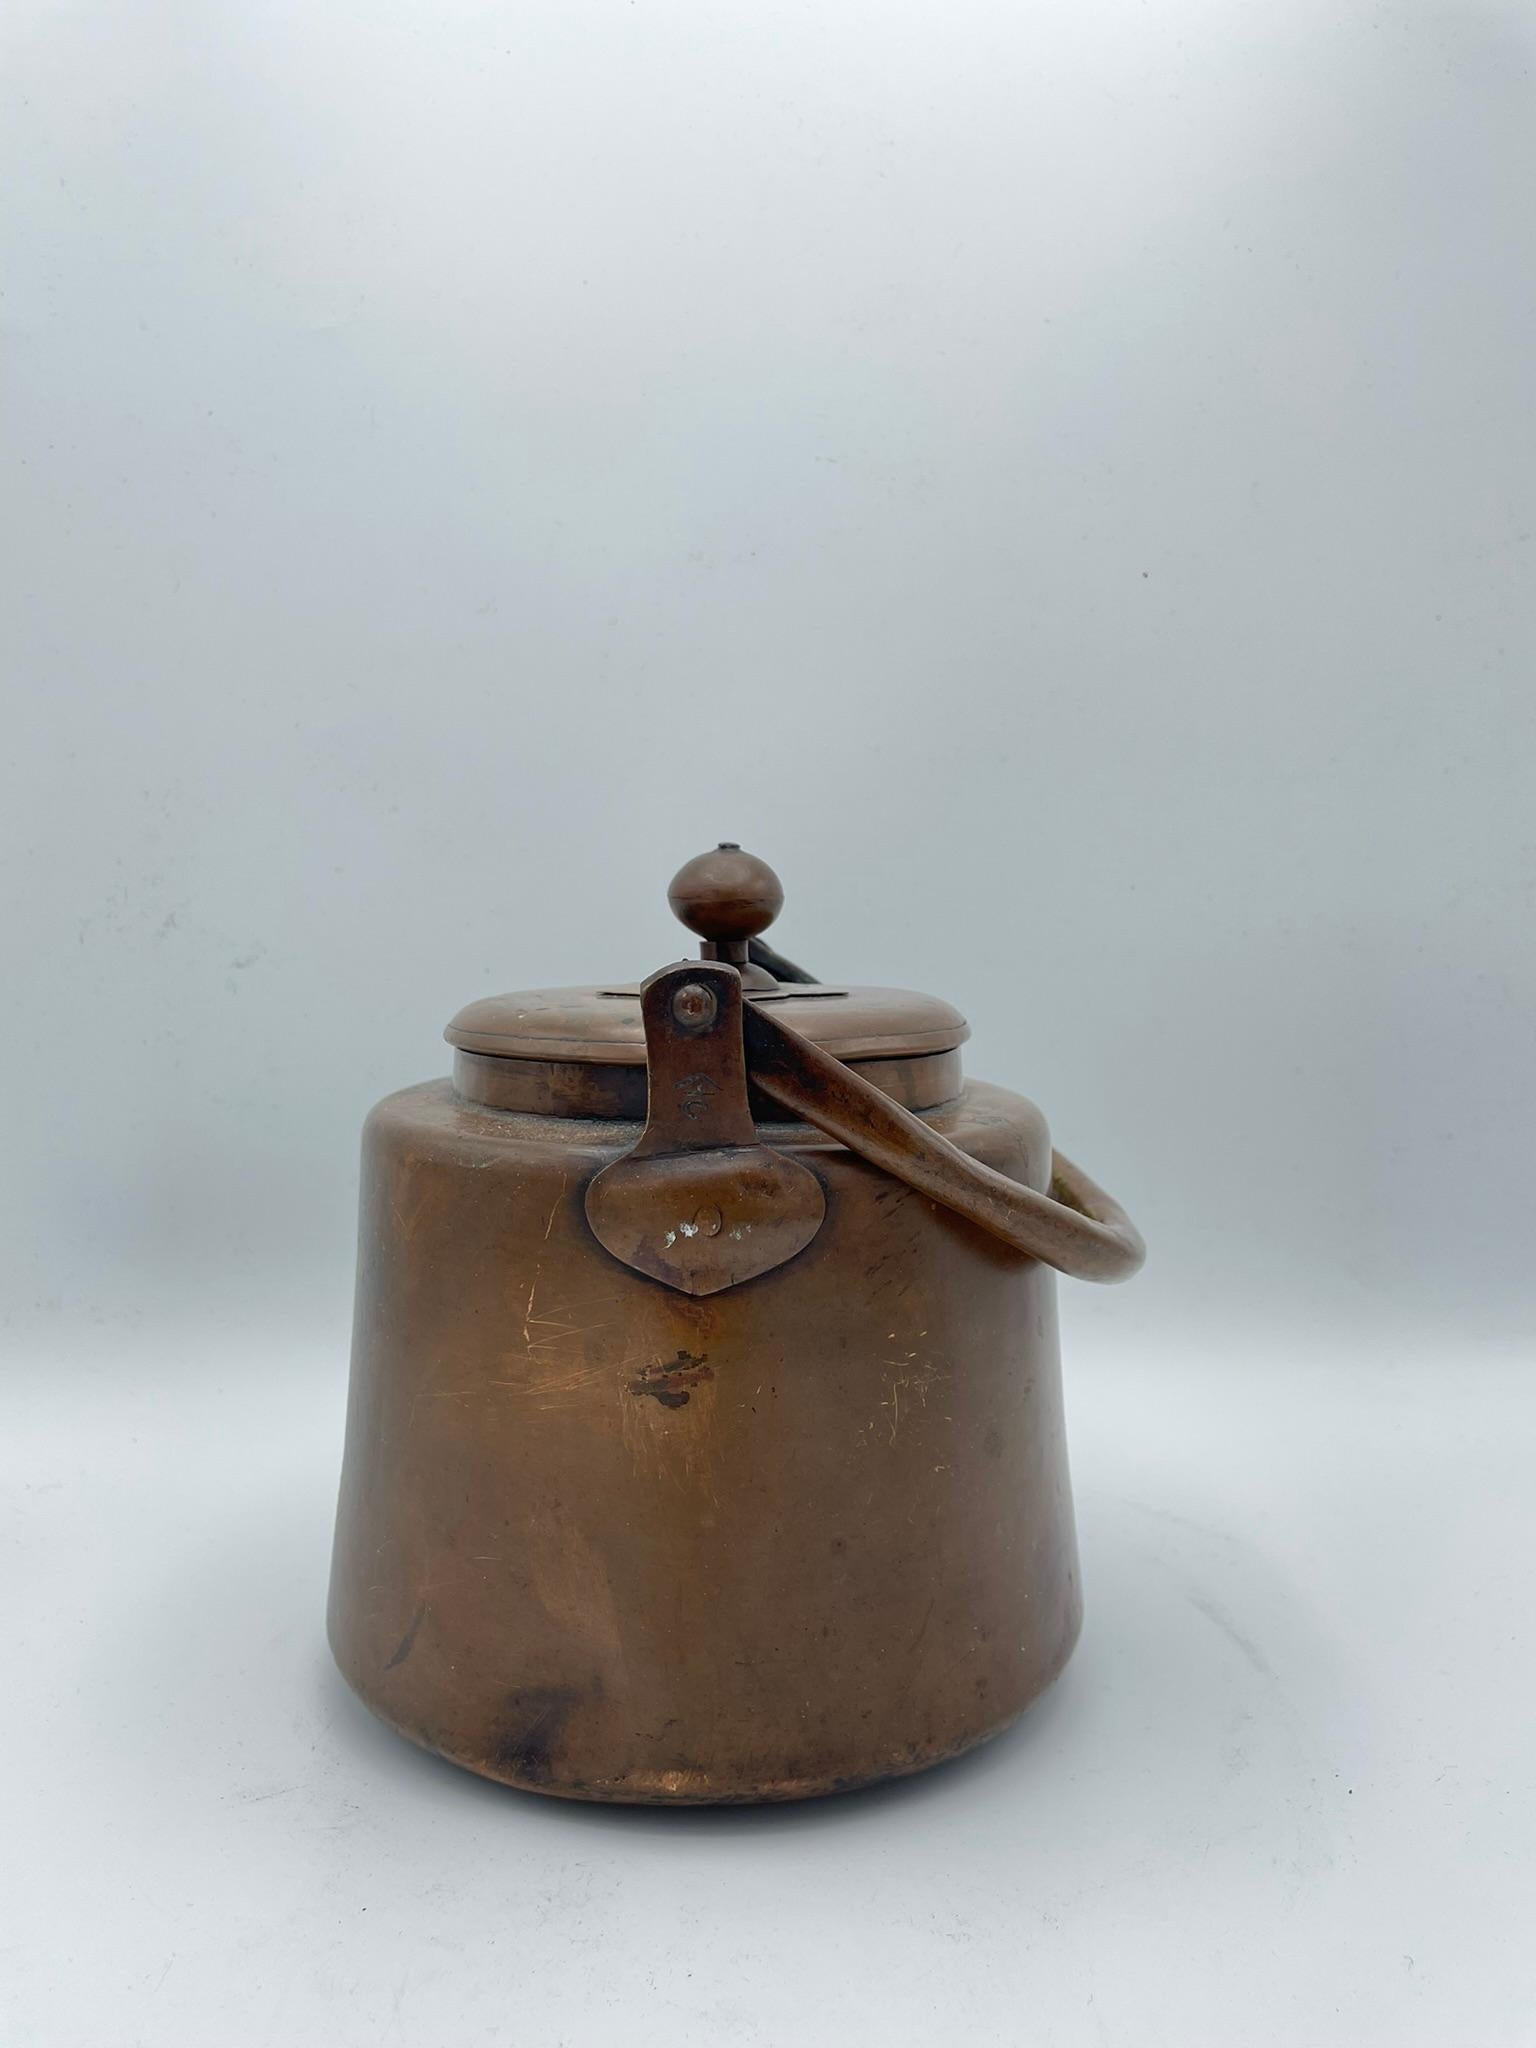 This is an antique pitcher for tea ceremony made in Japan around 1920s (Taisho era). And made with Copper. 

This kind of pitchers are called 'Mizusashi' in Japanese. A mizusashi is a tool used to hold water needed for the tea ceremony. It is used